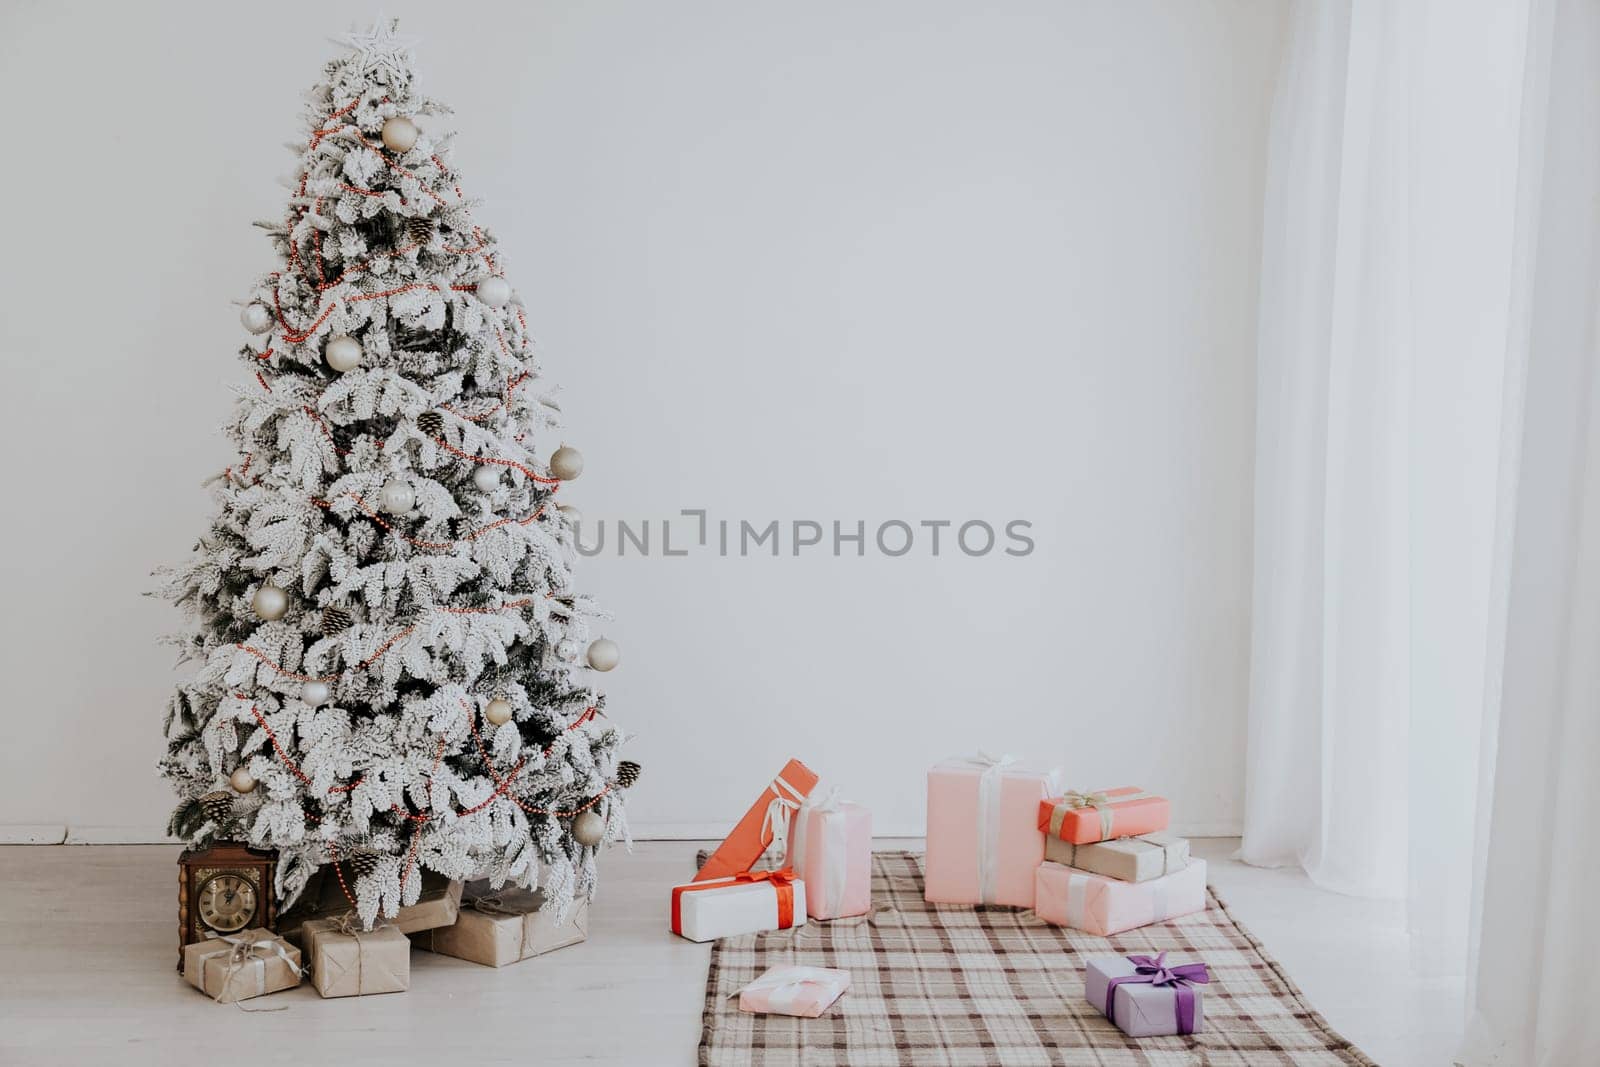 winter Christmas background bed bedroom tree holiday gifts new year by Simakov